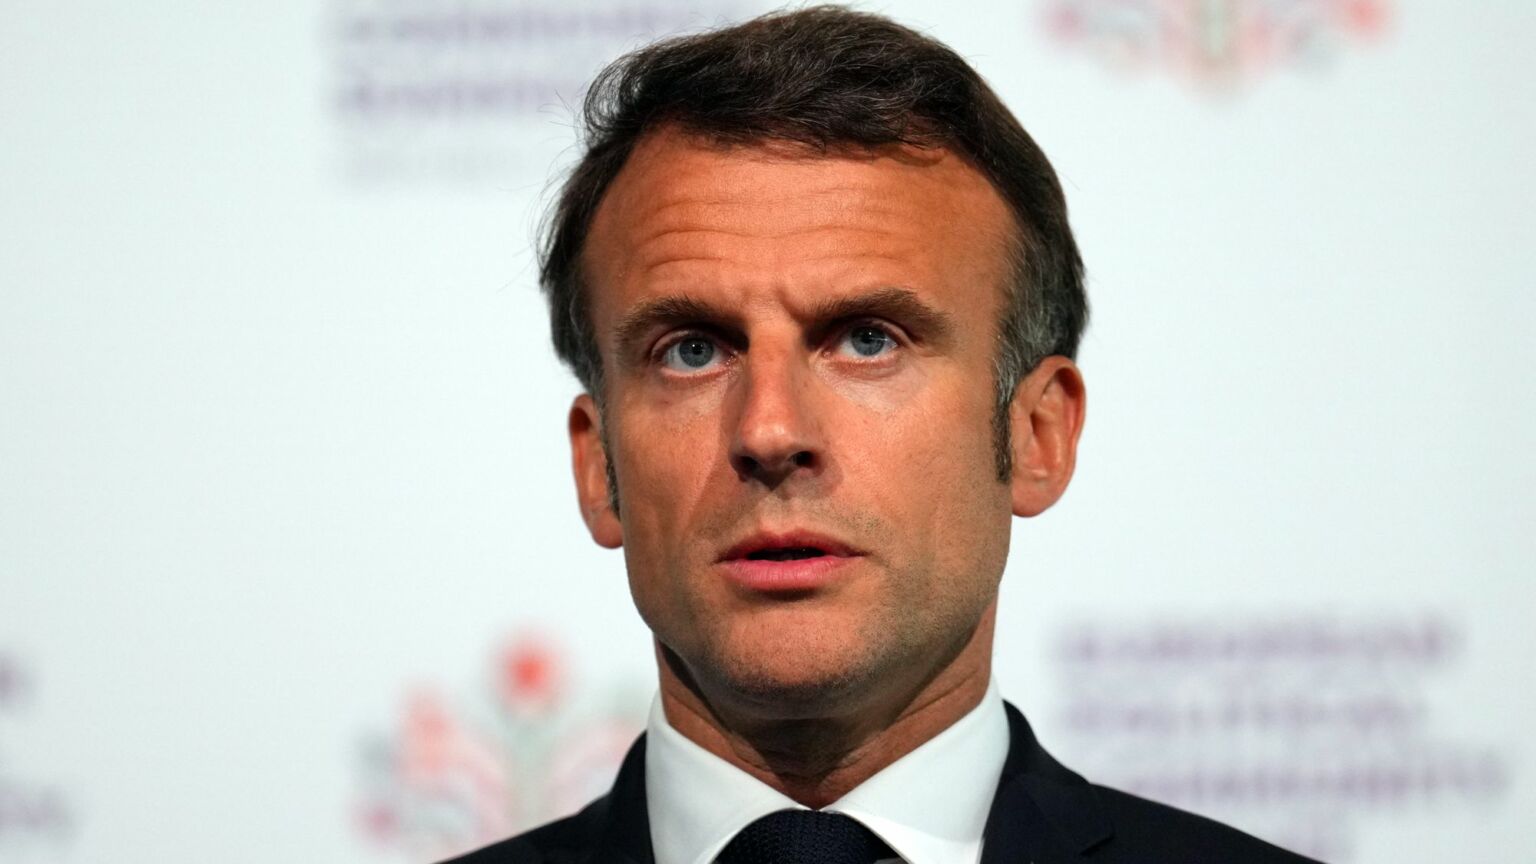 Macron says Olympic opening ceremony could move from river to stadium if security threat